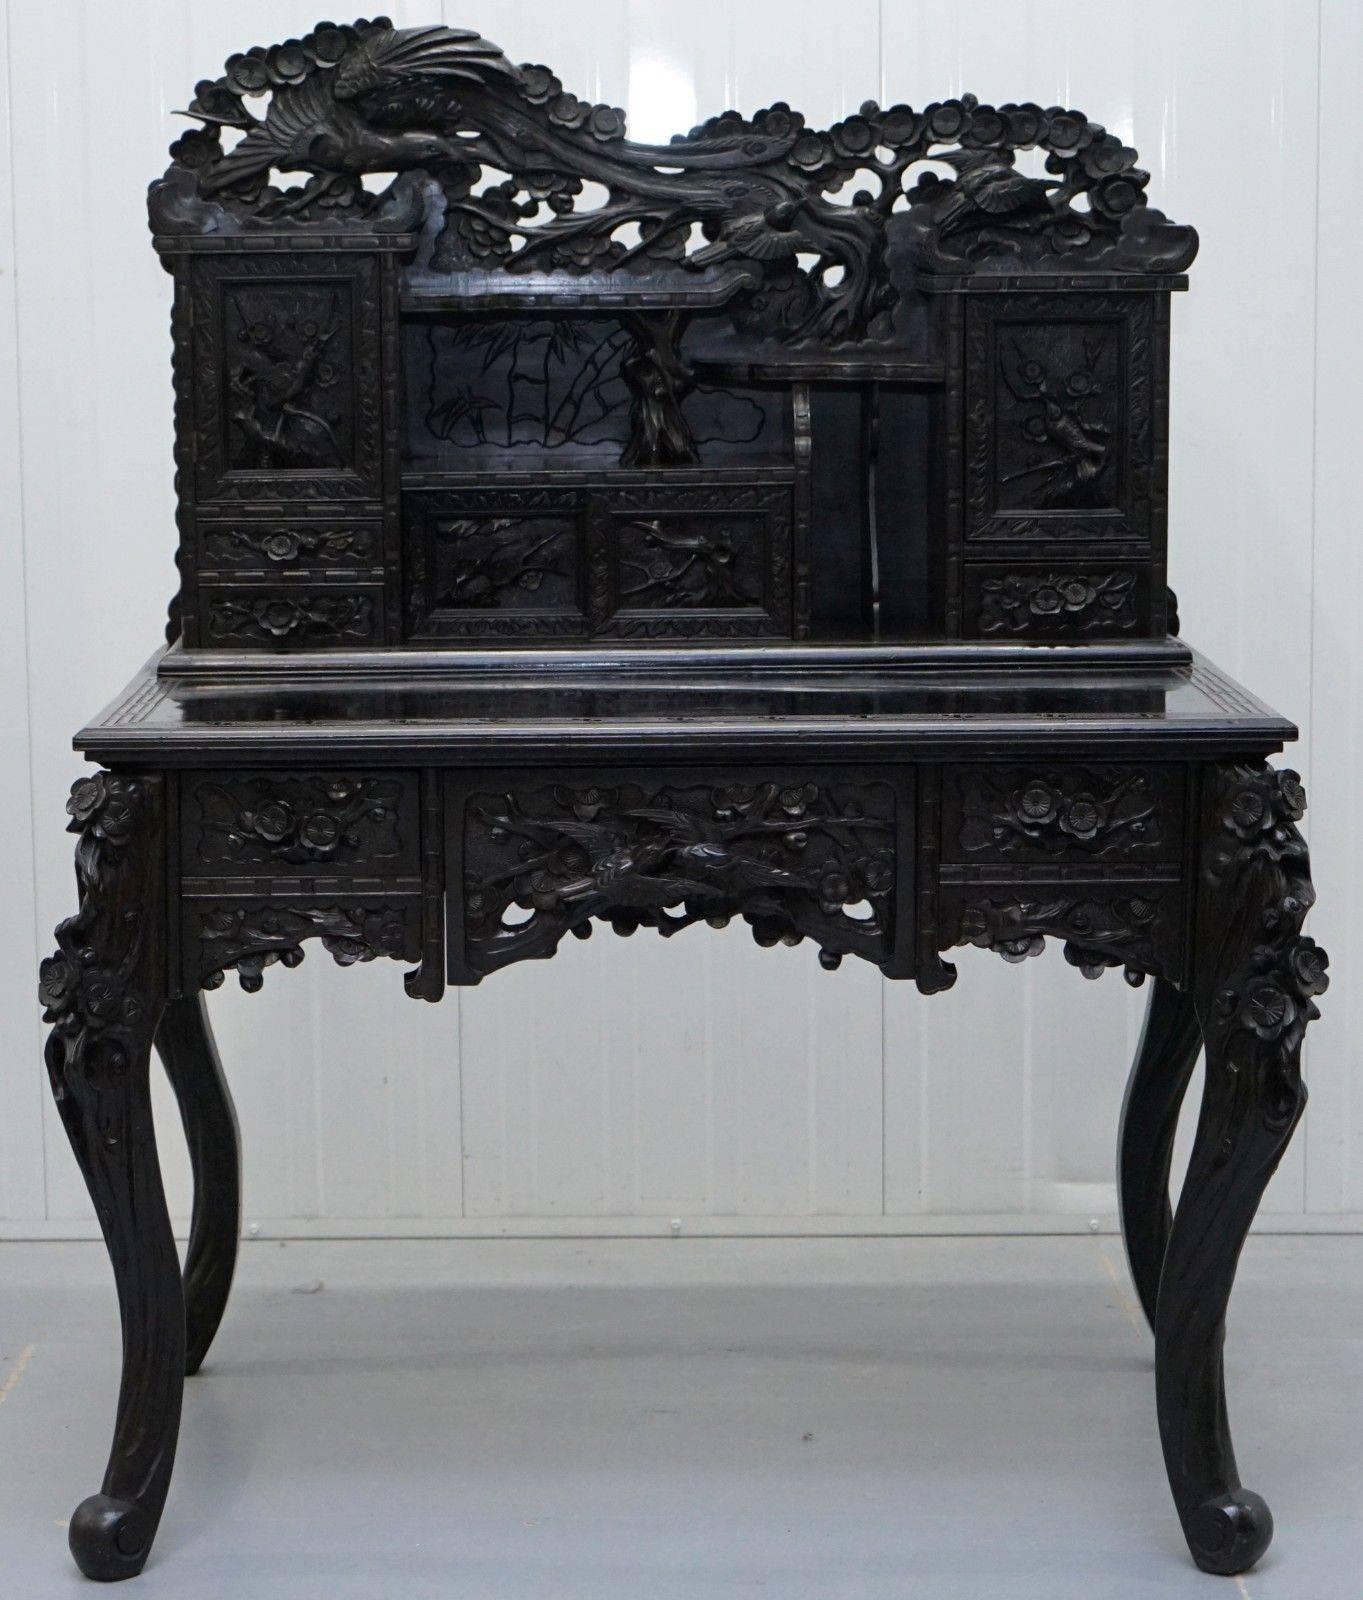 We are delighted to offer for sale this jawing dropping circa 1900 hand-carved Chinese export hand-carved solid teak writing desk with Ebonised black lacquered finish 

A very good looking and well-made piece, I’ve not seen another of this quality